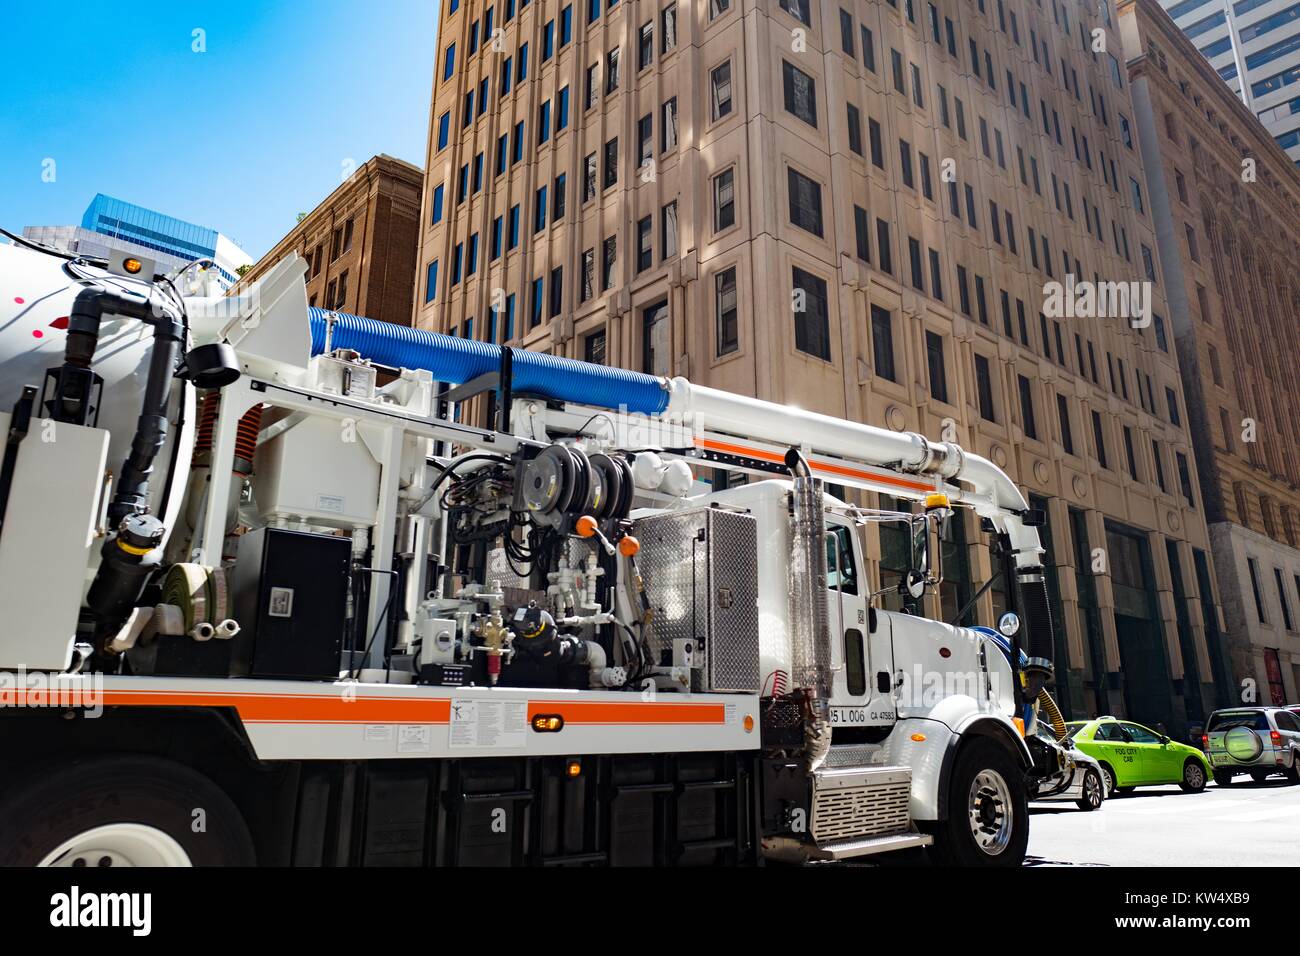 Vac con sewer cleaning truck in the Financial District neighborhood of San Francisco, California, September 26, 2016. Stock Photo